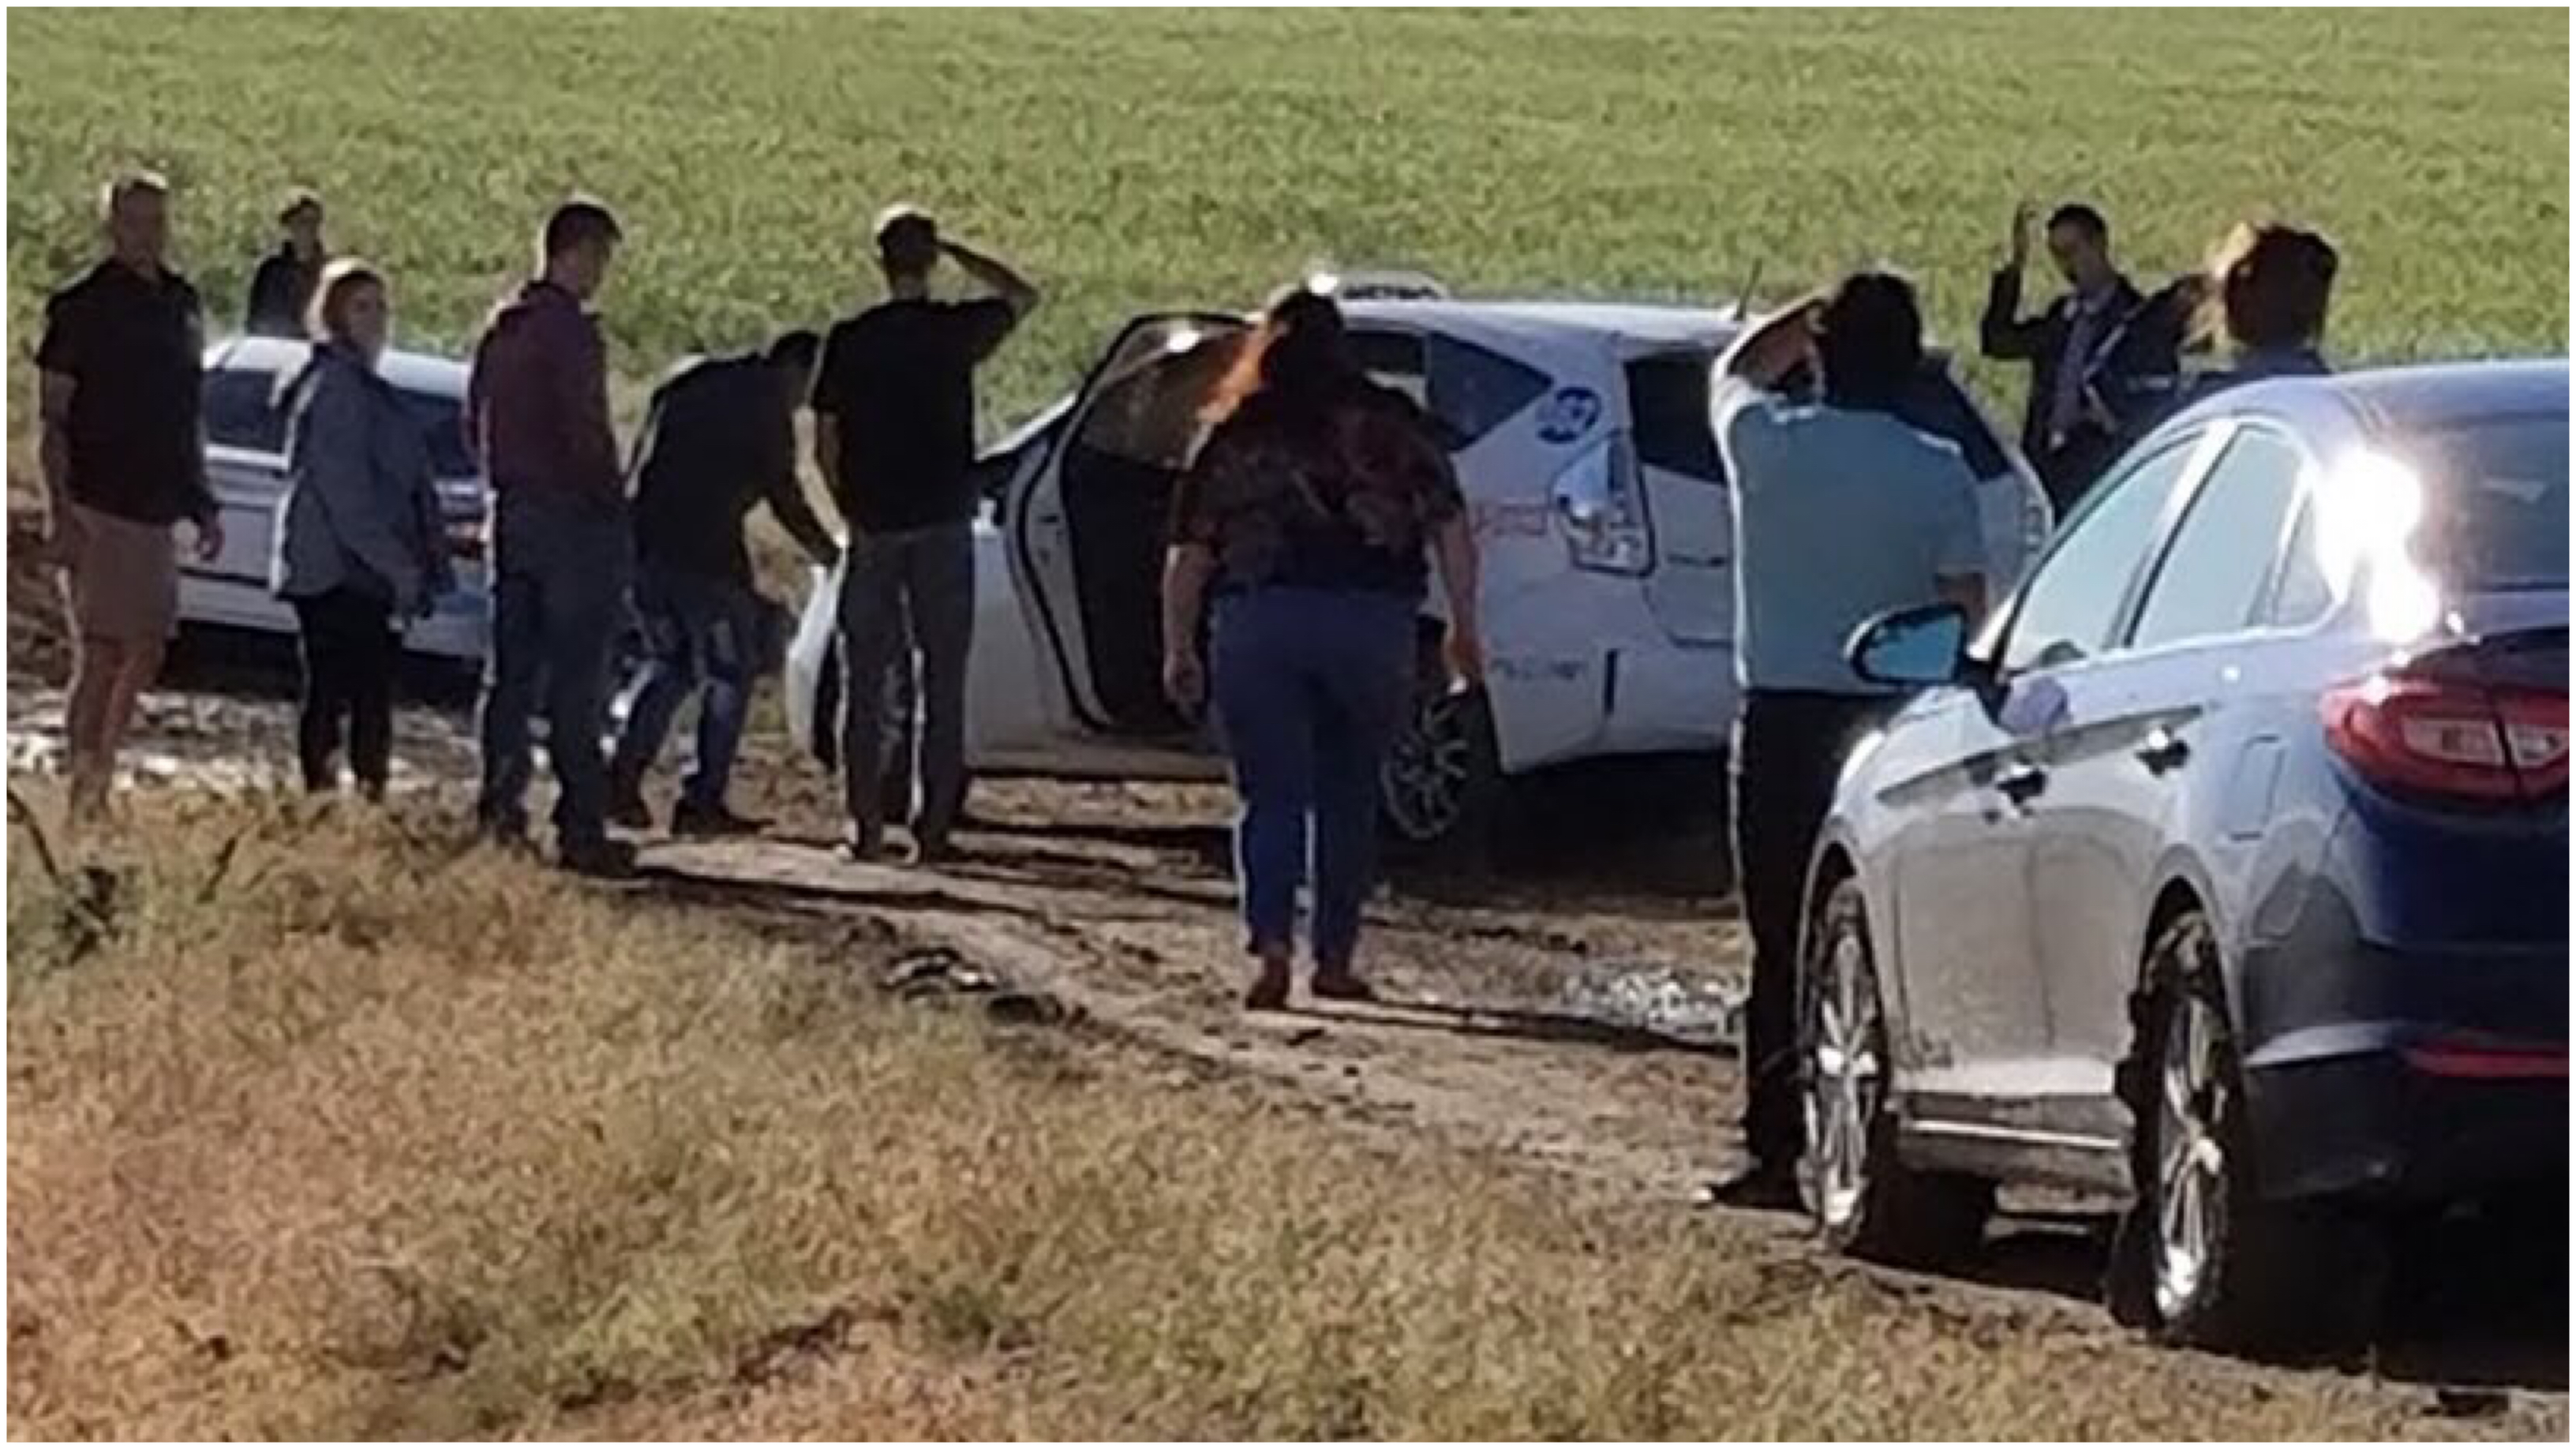 Google Maps lead nearly 100 drivers into a muddy remote field when they tried to find a detour.